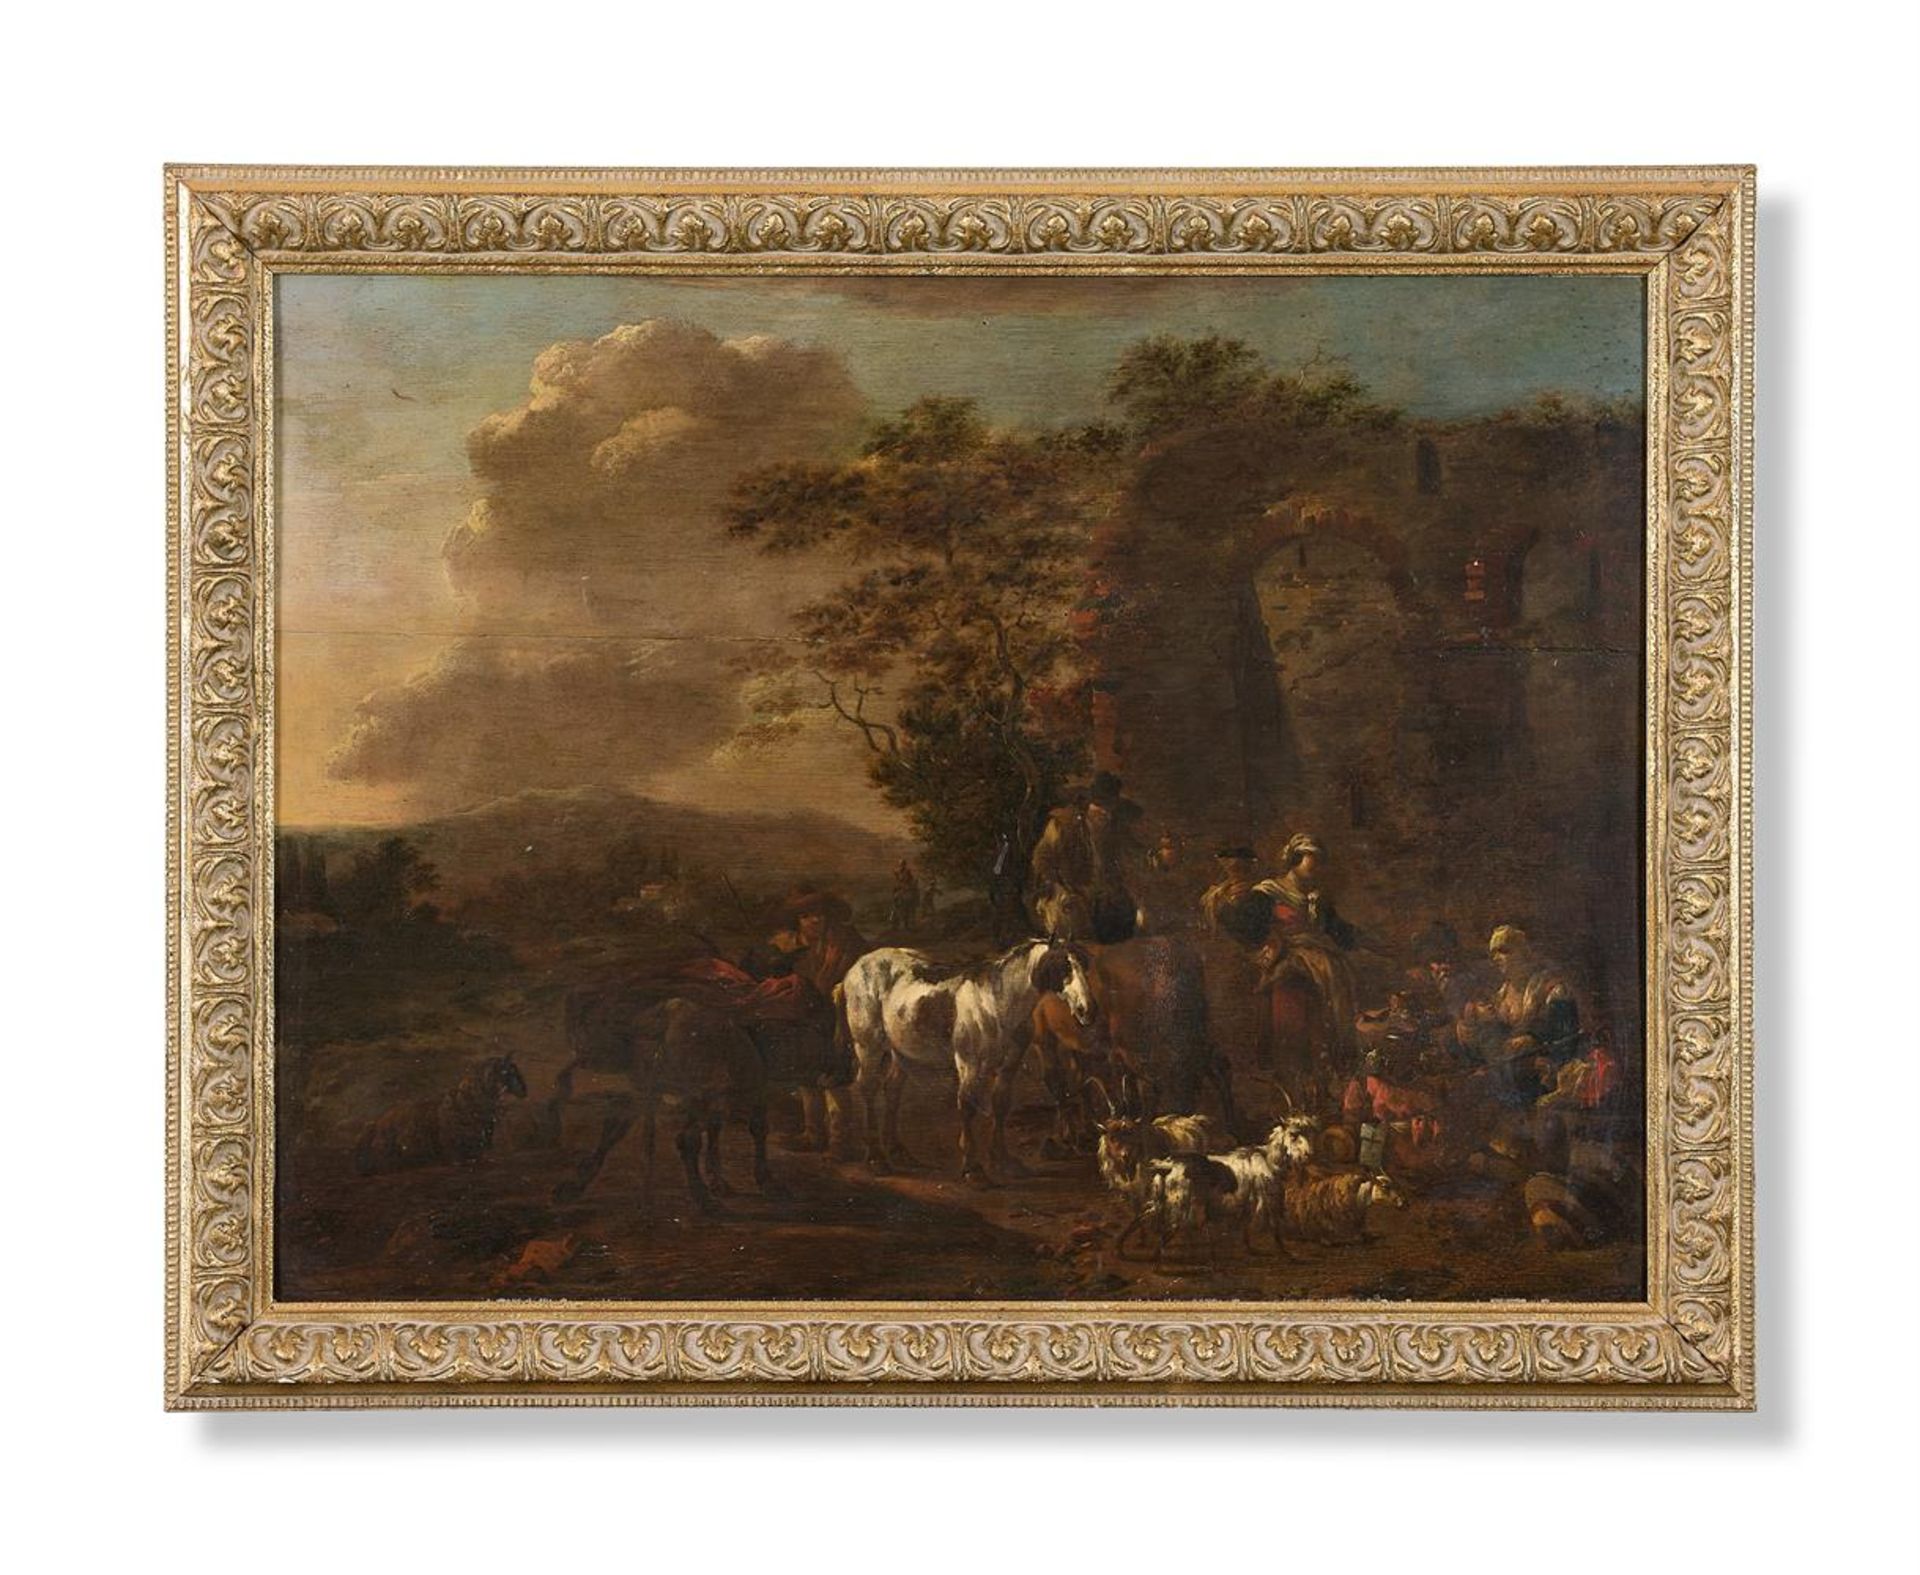 CIRCLE OF NICOLAES PIETERSZ. BERCHEM (DUTCH 1620-1683), A WOODED LANDSCAPE WITH TRAVELLERS